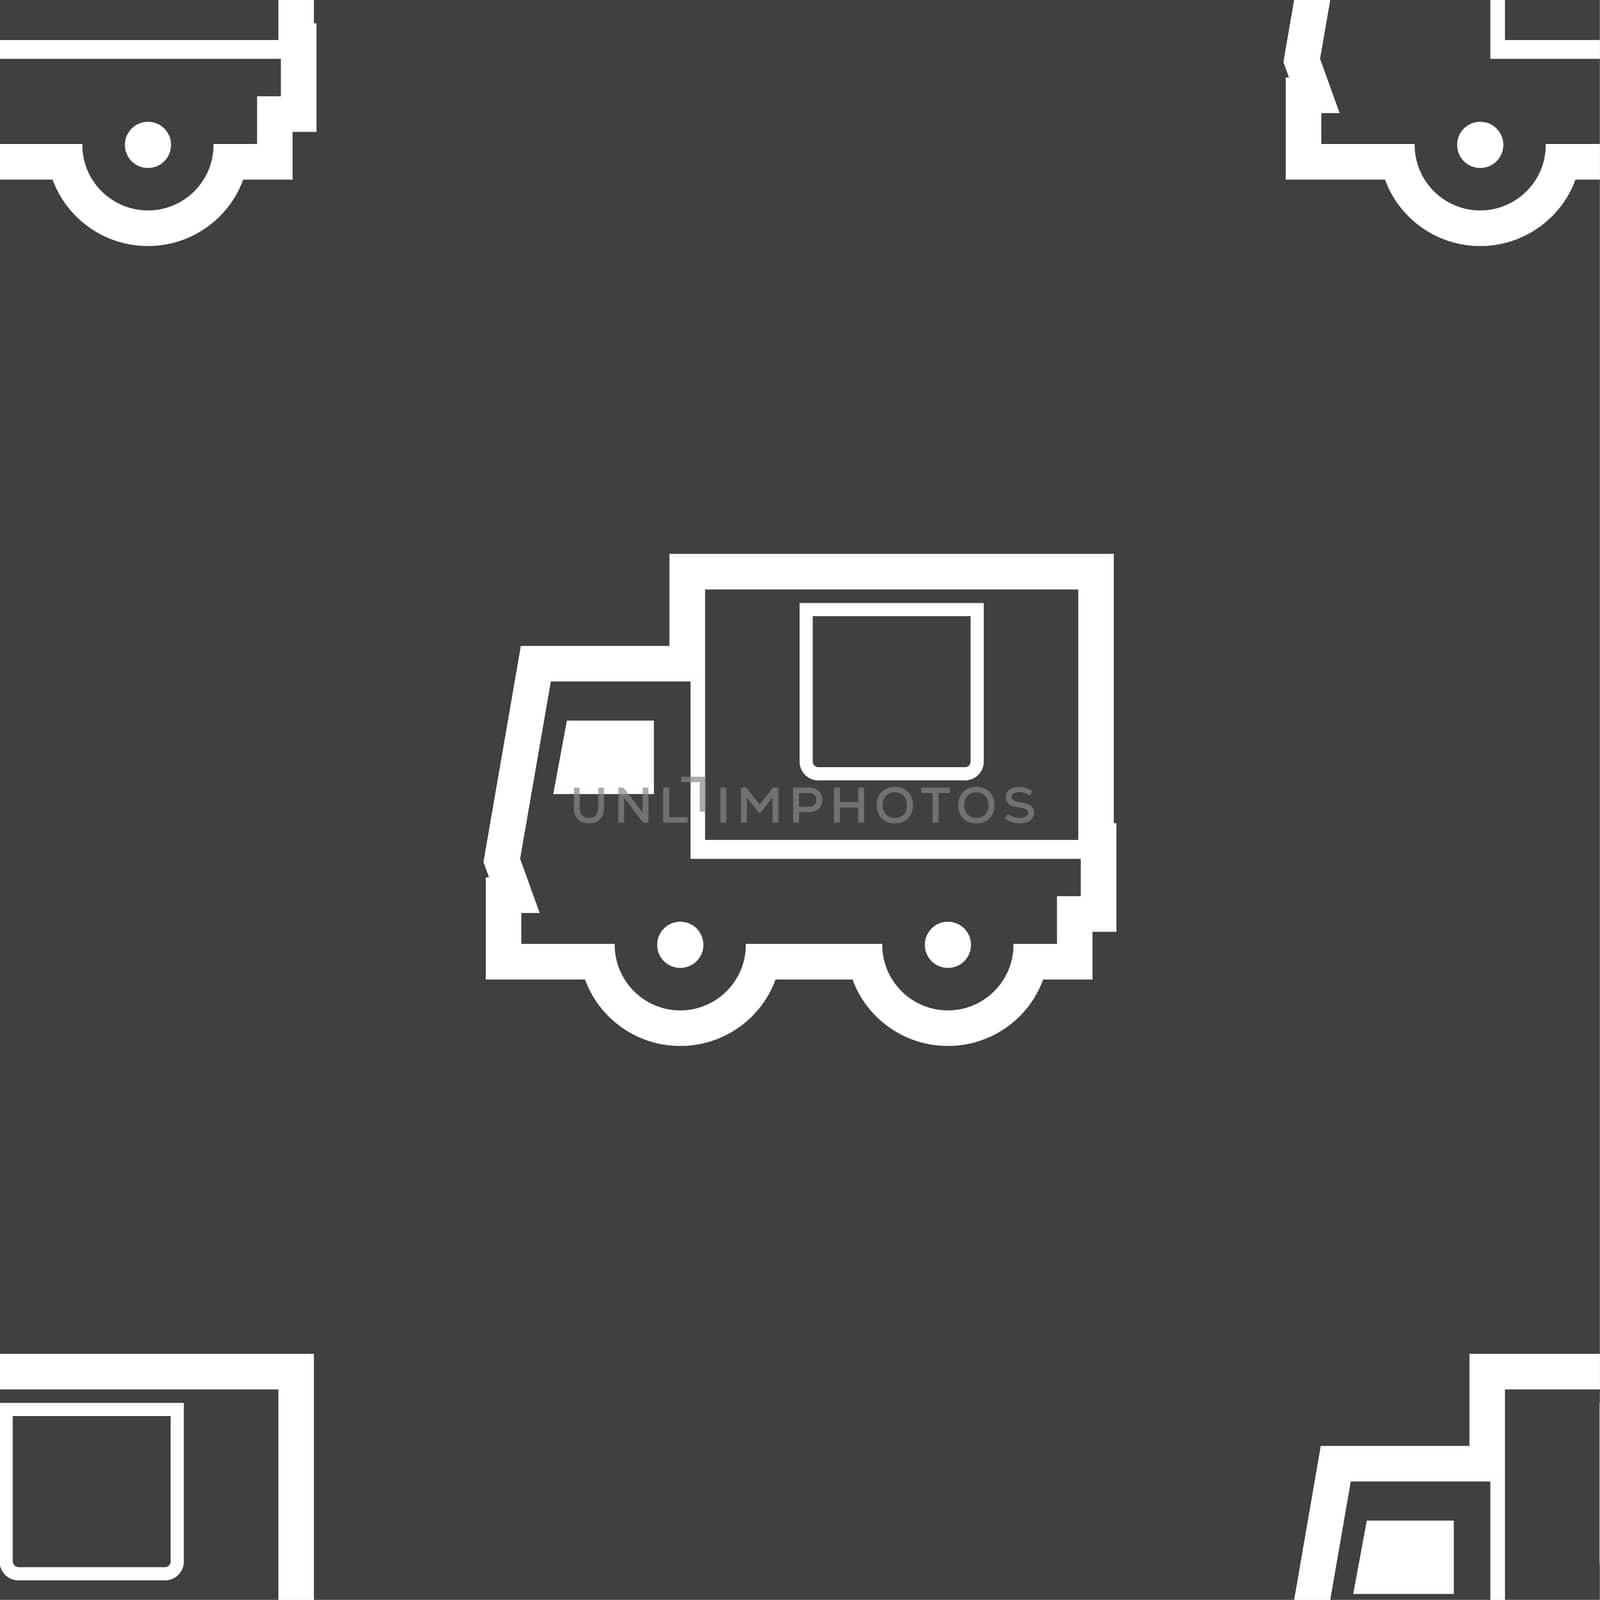 Delivery truck icon sign. Seamless pattern on a gray background. illustration